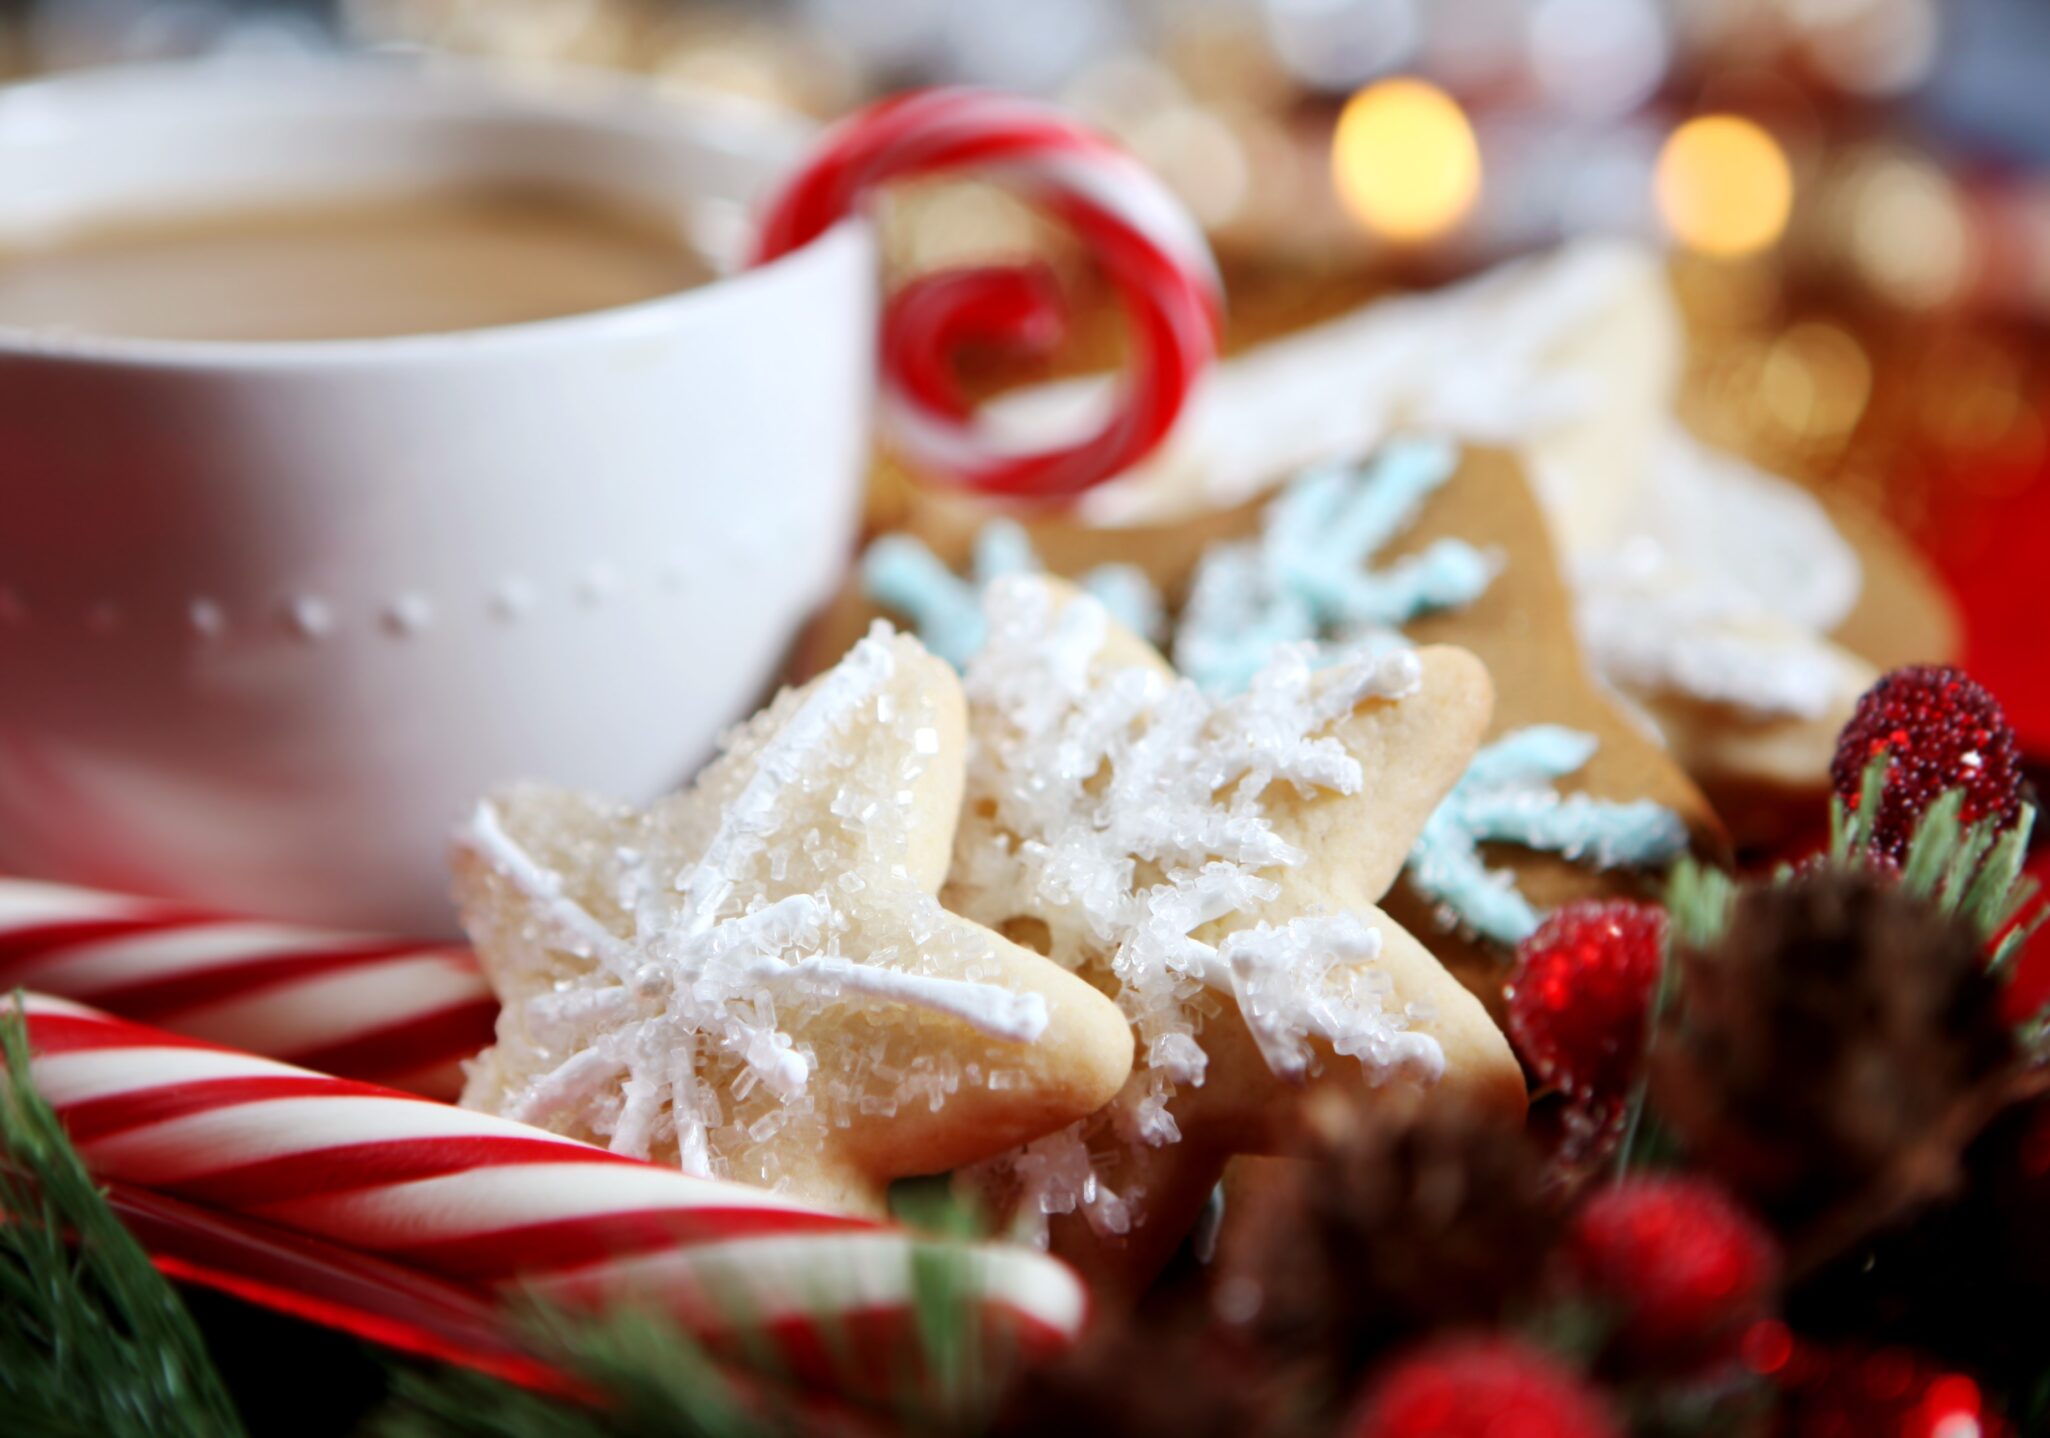 Close up of a festive plate full of holiday cookies and hot cocoa.